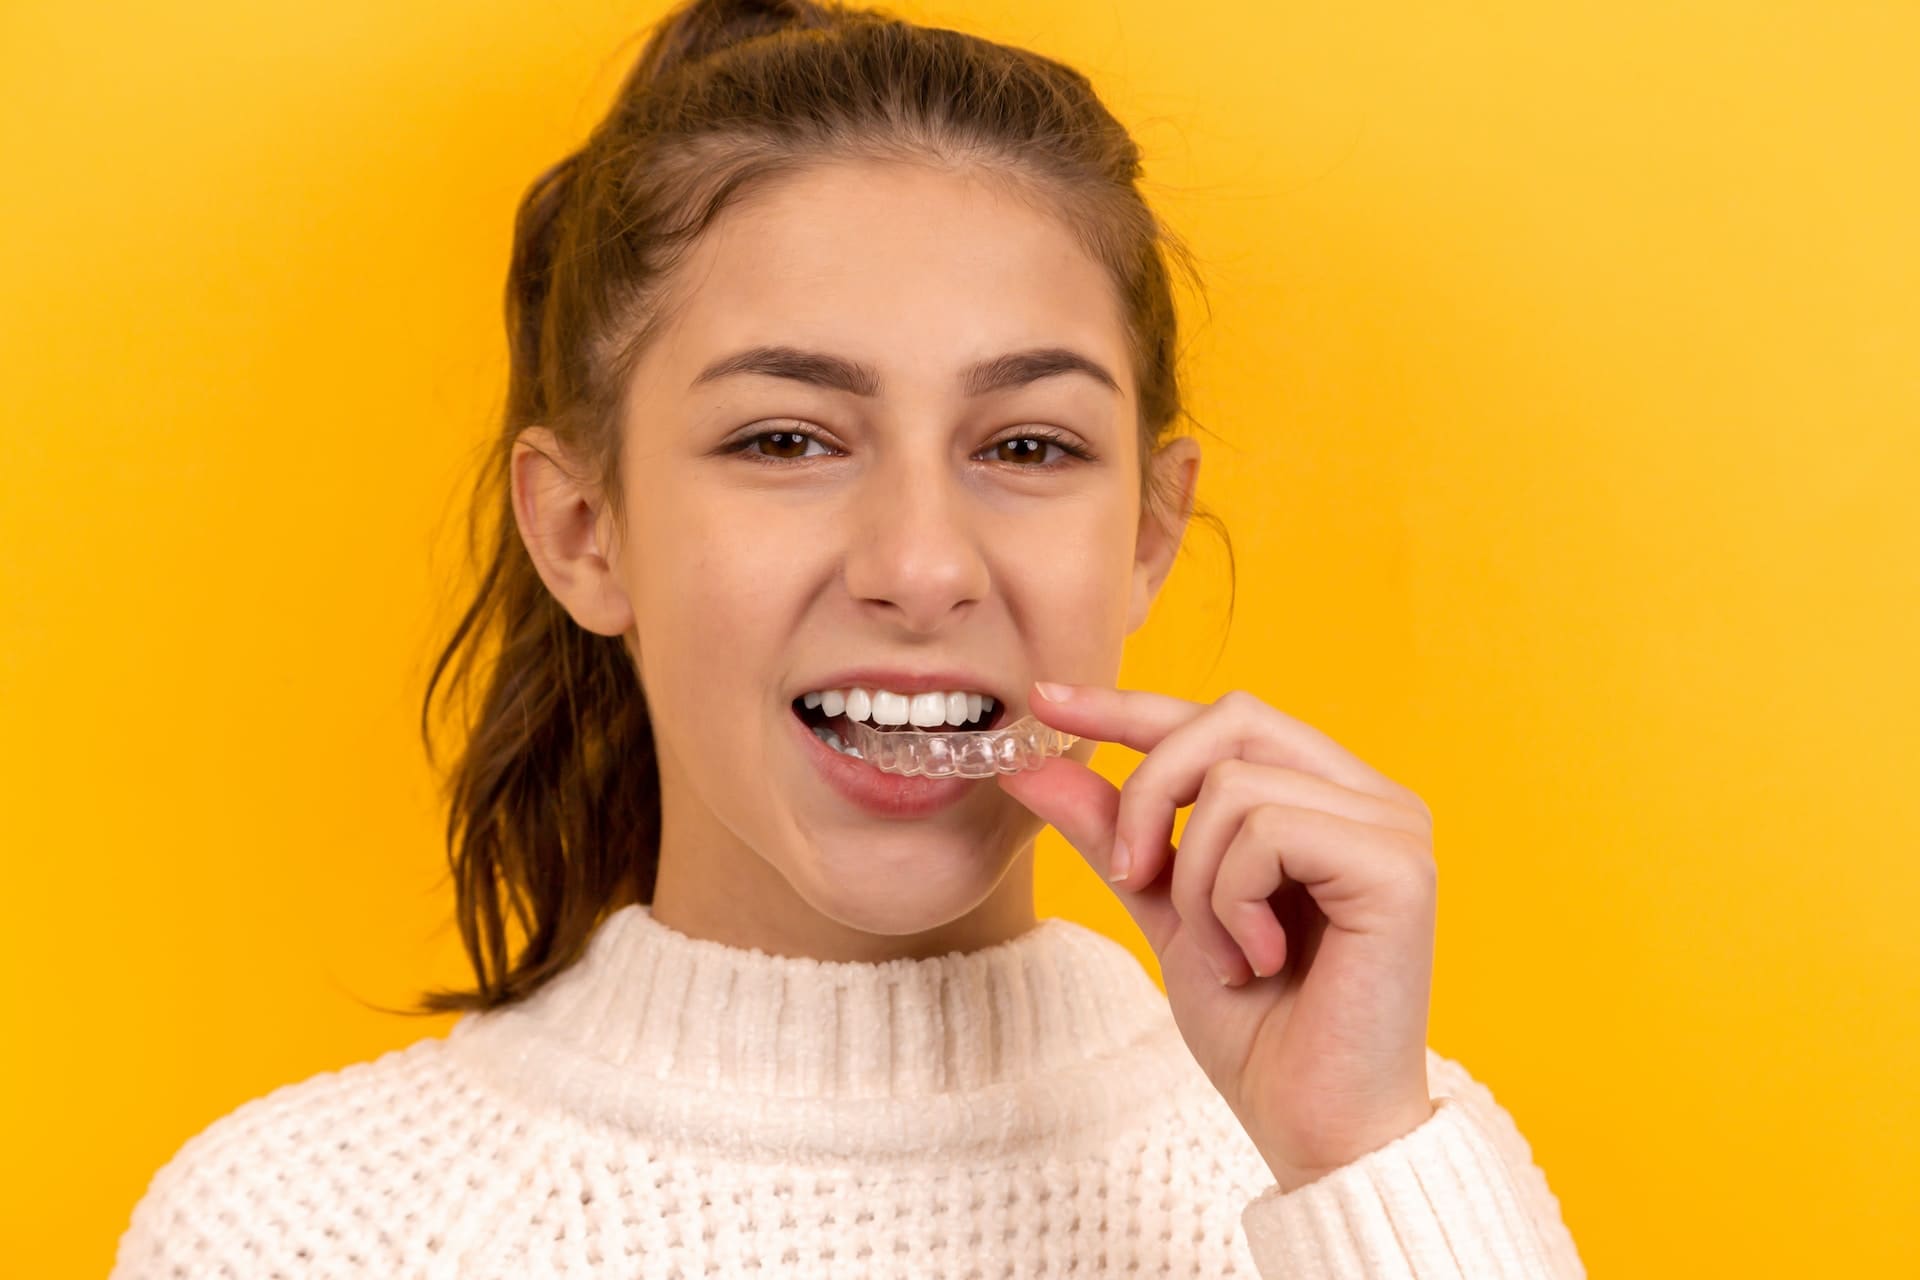 Invisalign First – Now Available For Kids As Young as Six! » Eckels  Orthodontics